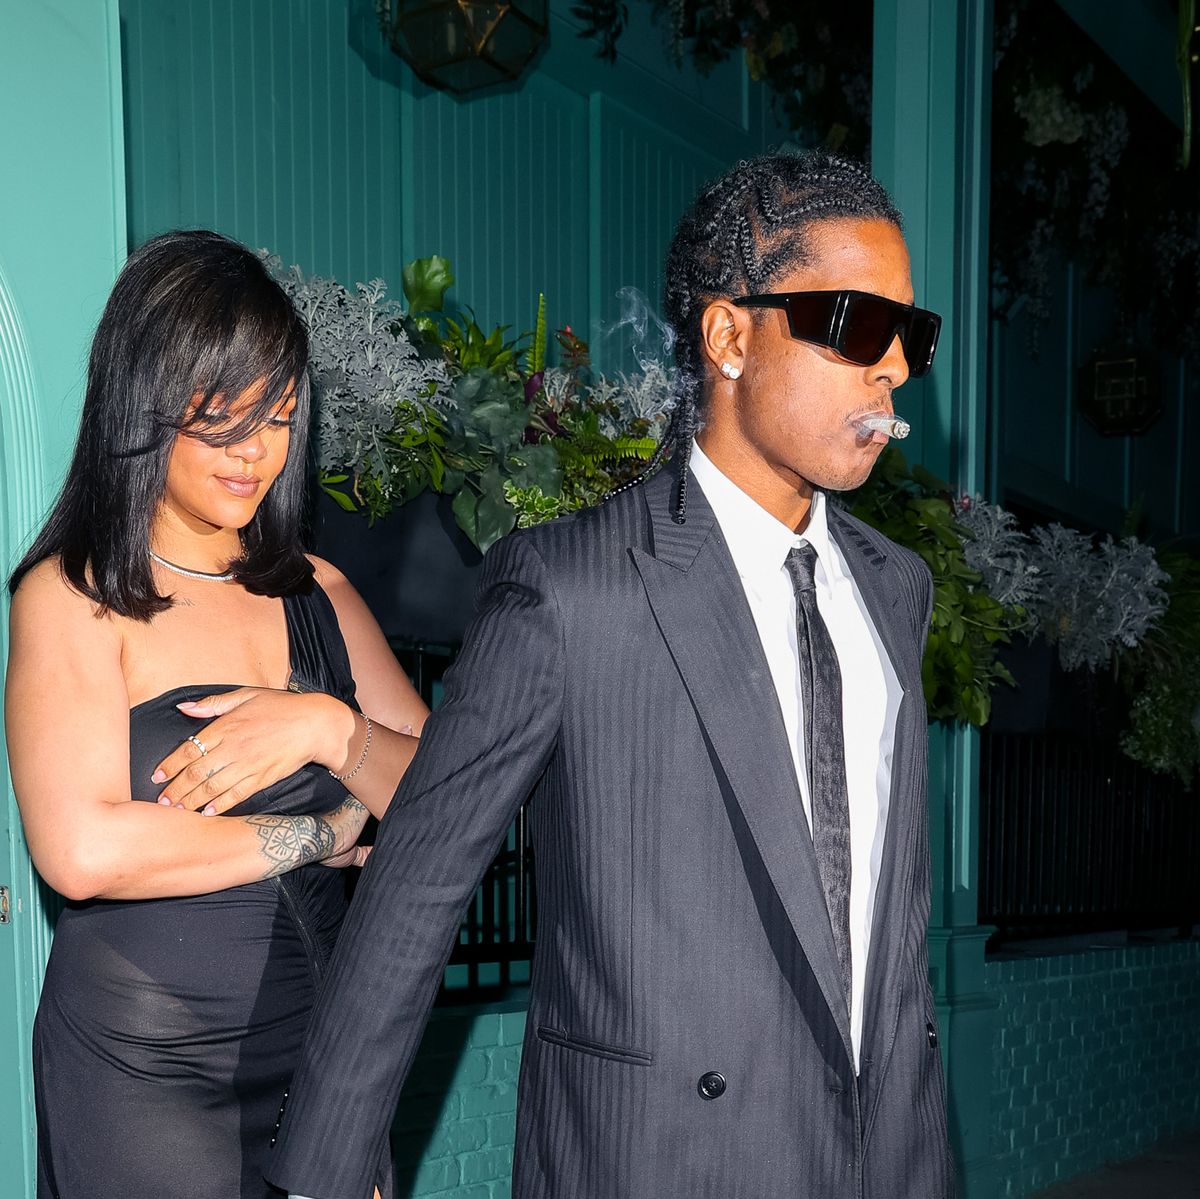 A$AP Rocky Just Nailed His 34th Birthday Outfit on a Date With Rihanna